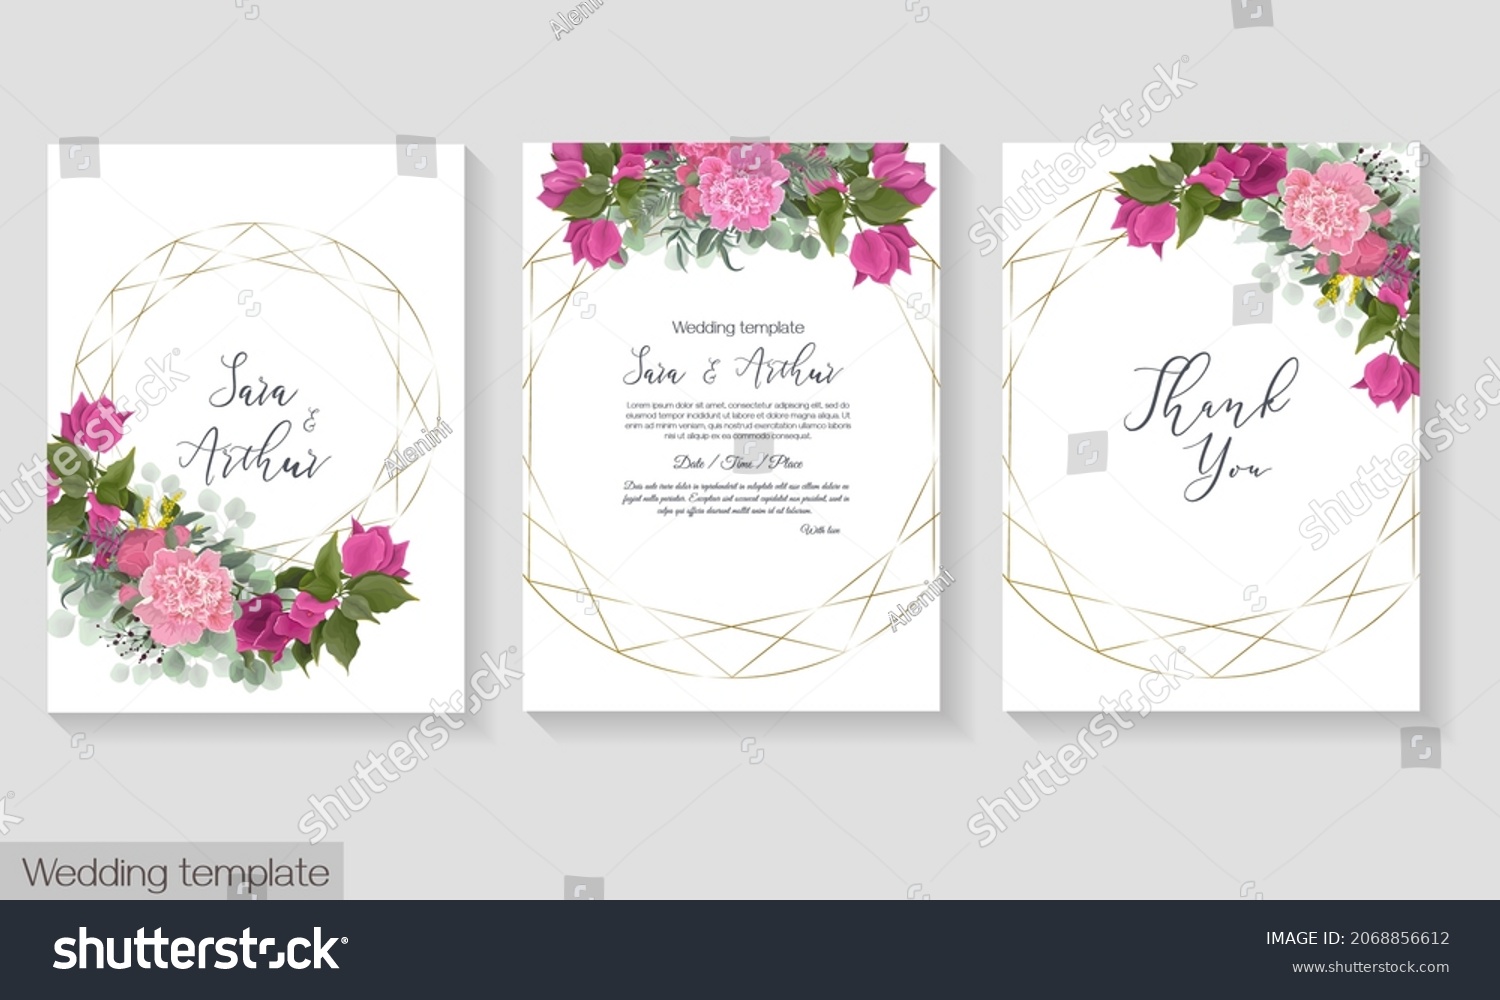 SVG of Vector template for wedding invitation. Round gold frame, peony flowers, Bougainvillea flower branches, berries, green leaves and plants.  svg